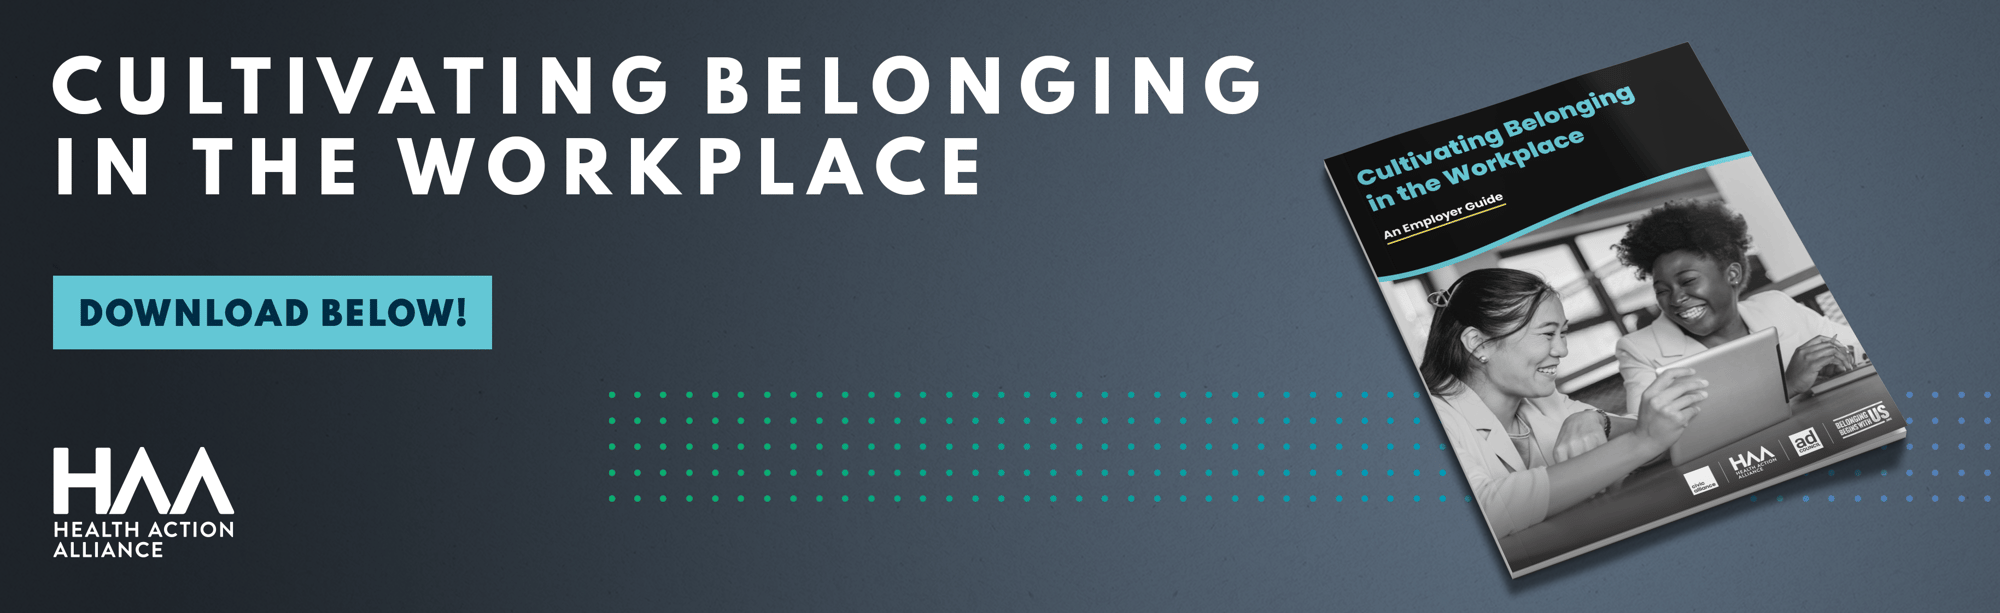 Cultivating Belonging in the Workplace_Hubspot Banner